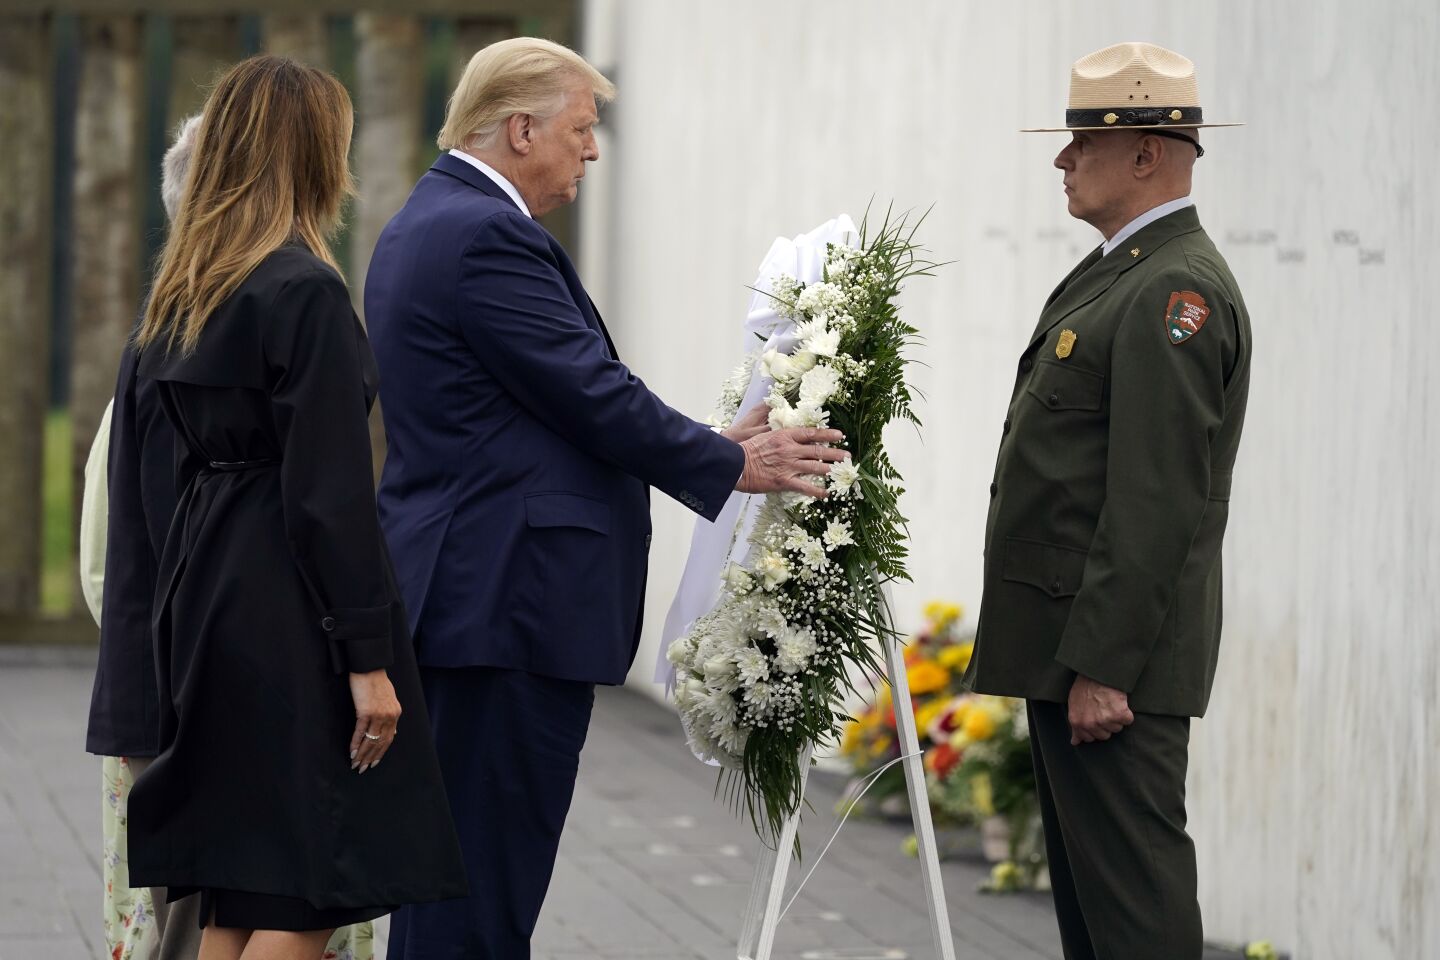 President Trump and First Lady Melania Trump lay a wreath at the Flight 93 National Memorial in Shanksville, Pa.